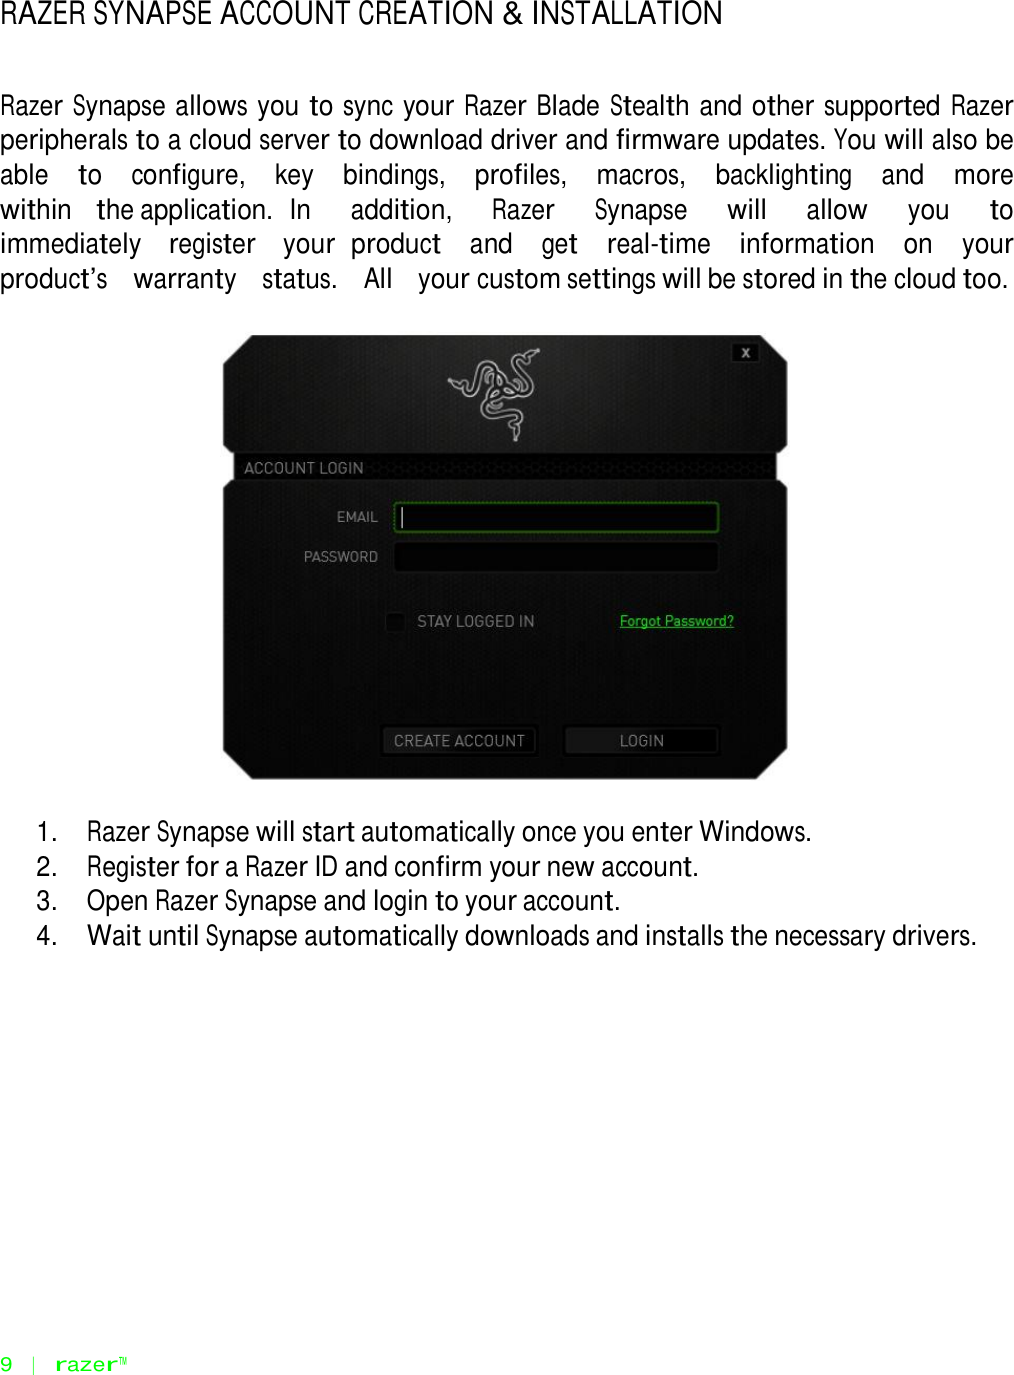    RAZER SYNAPSE ACCOUNT CREATION &amp; INSTALLATION    Razer Synapse allows you to sync your Razer Blade Stealth and other supported Razer peripherals to a cloud server to download driver and firmware updates. You will also be able   to   configure,   key   bindings,   profiles,   macros,   backlighting   and   more   within   the application. In   addition,   Razer   Synapse   will   allow   you   to   immediately   register   your product   and   get   real-time   information   on   your   product‟s   warranty   status.   All   your custom settings will be stored in the cloud too.      1.   Razer Synapse will start automatically once you enter Windows. 2.   Register for a Razer ID and confirm your new account. 3.   Open Razer Synapse and login to your account. 4.   Wait until Synapse automatically downloads and installs the necessary drivers.                    9   |   razer™ 